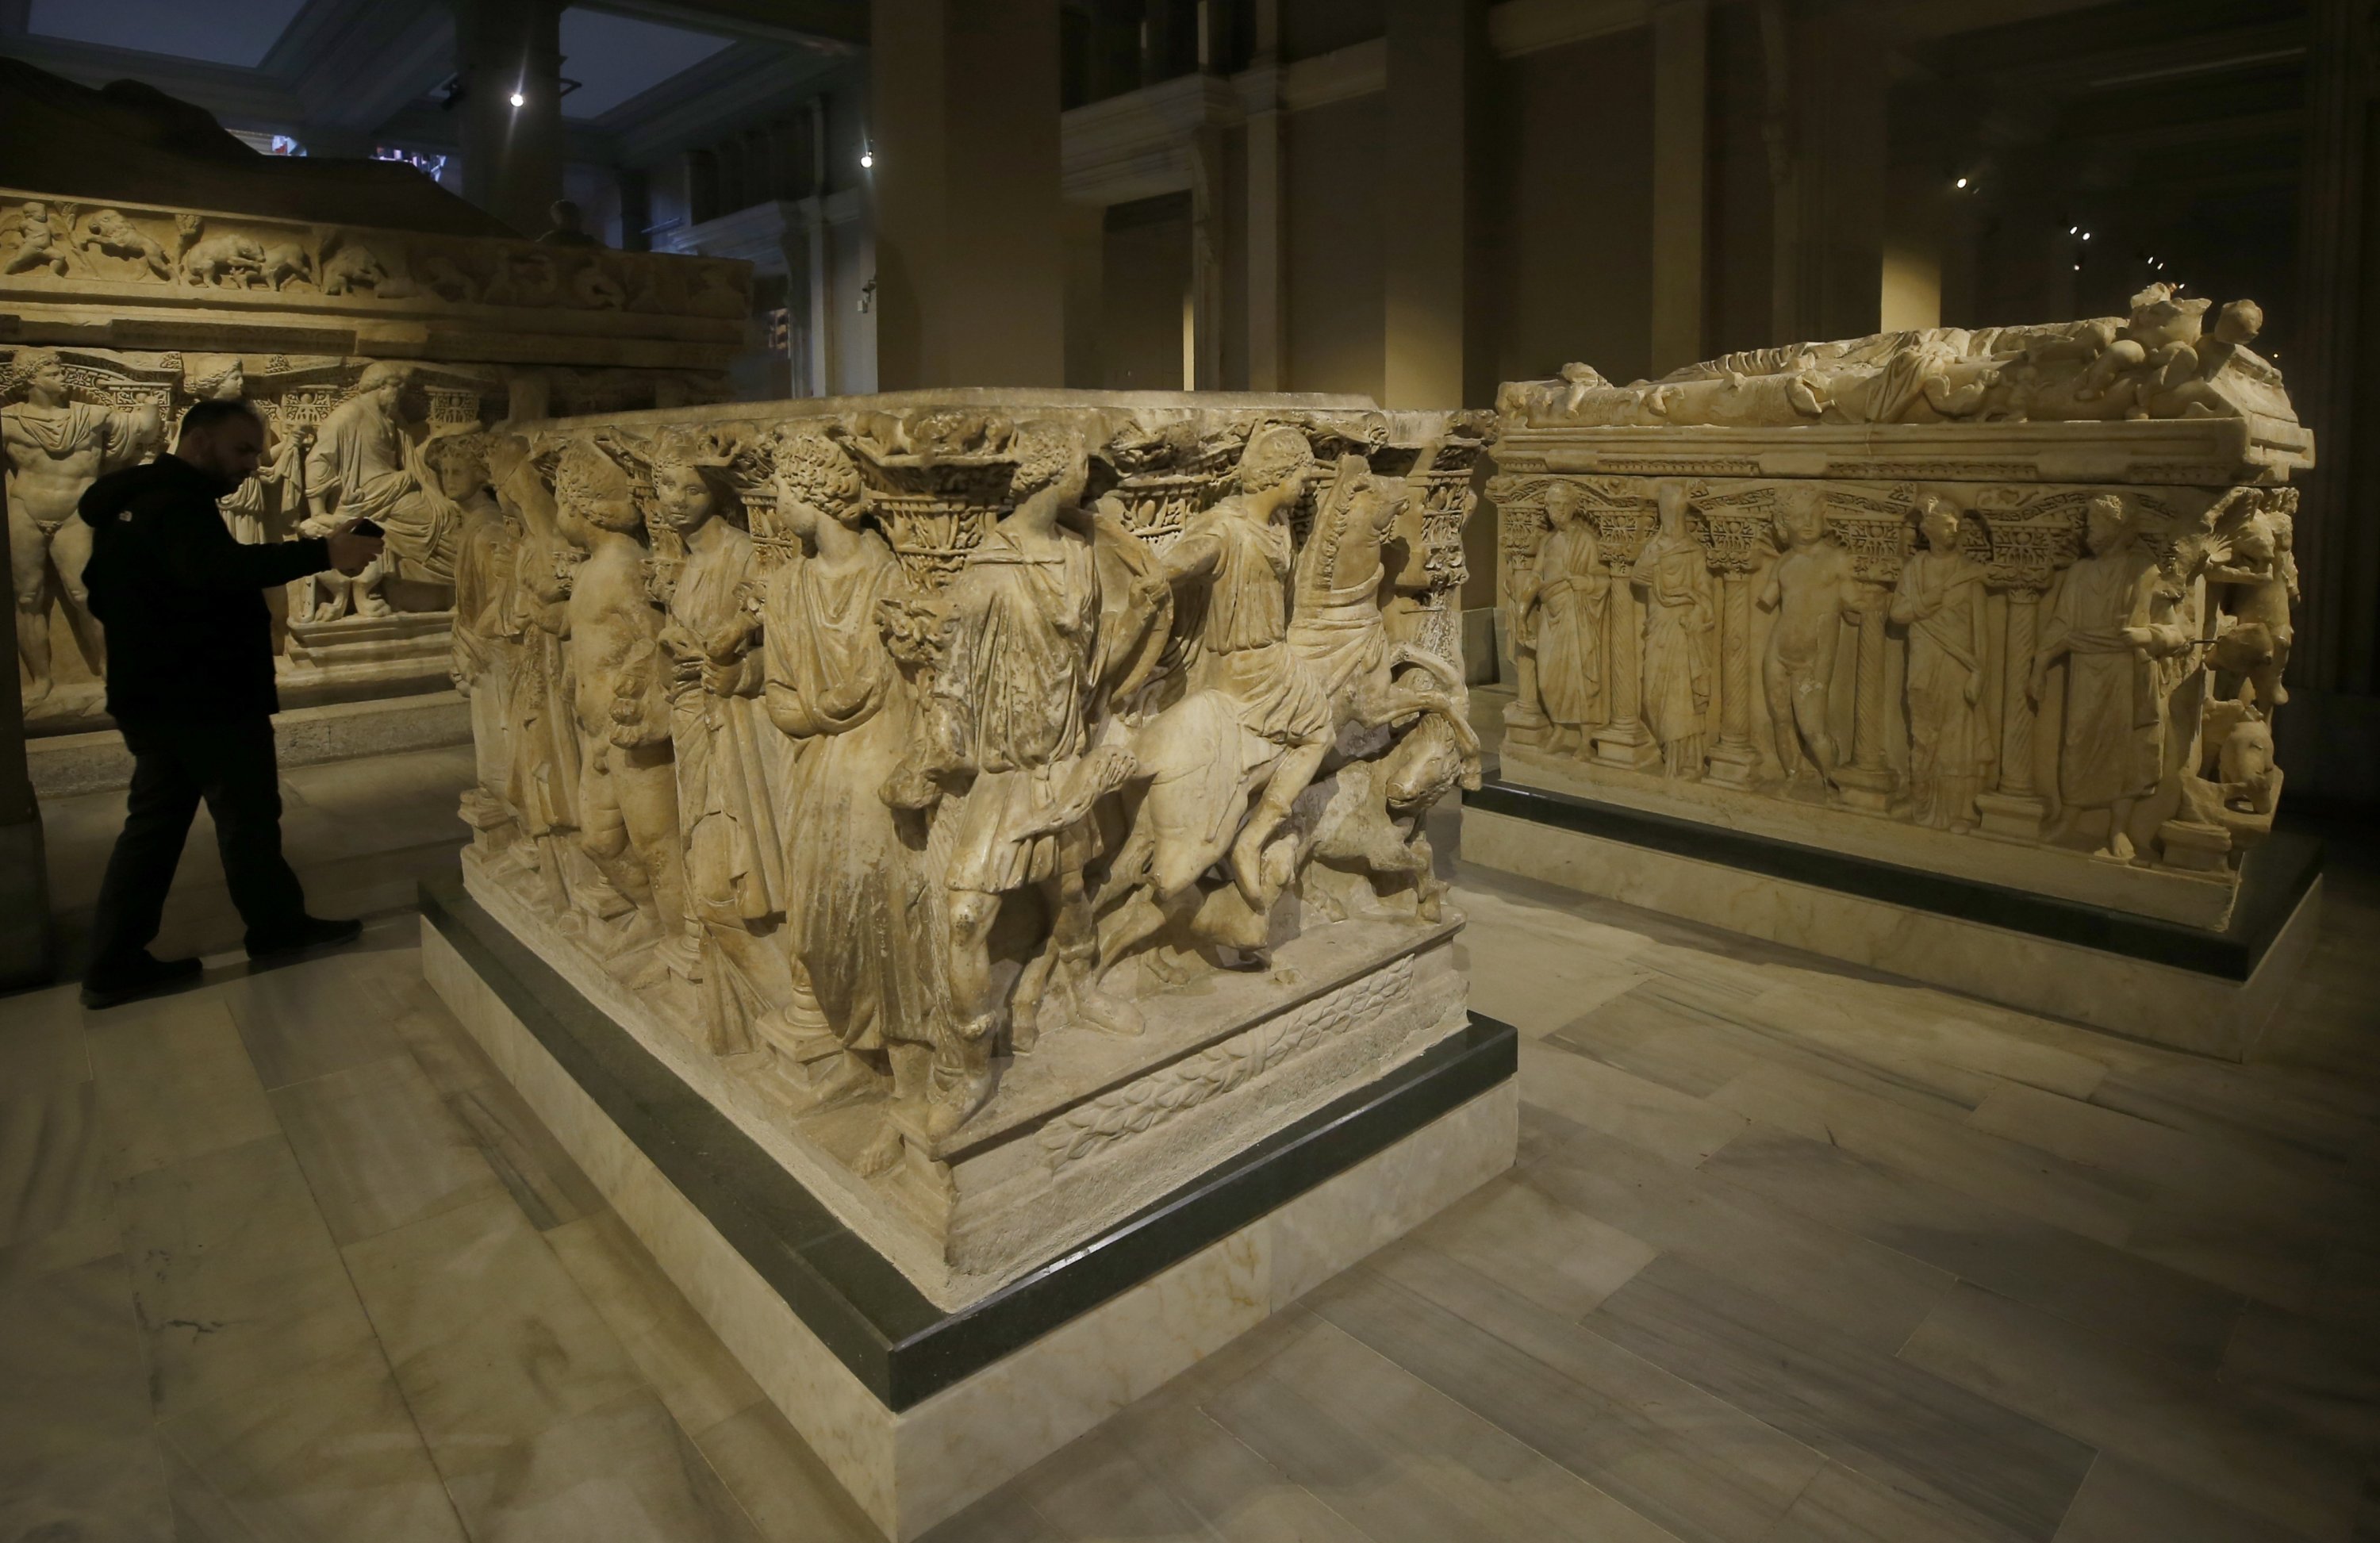 The Istanbul Archaeology Museums, established by Osman Hamdi Bey, have been welcoming visitors for 128 years to take a journey through history and trace the footsteps of civilizations, where world-renowned artifacts such as the Alexander Sarcophagus and the Treaty of Kadesh are exhibited, Istanbul, Türkiye, Jan. 9, 2019. (AA Photo)